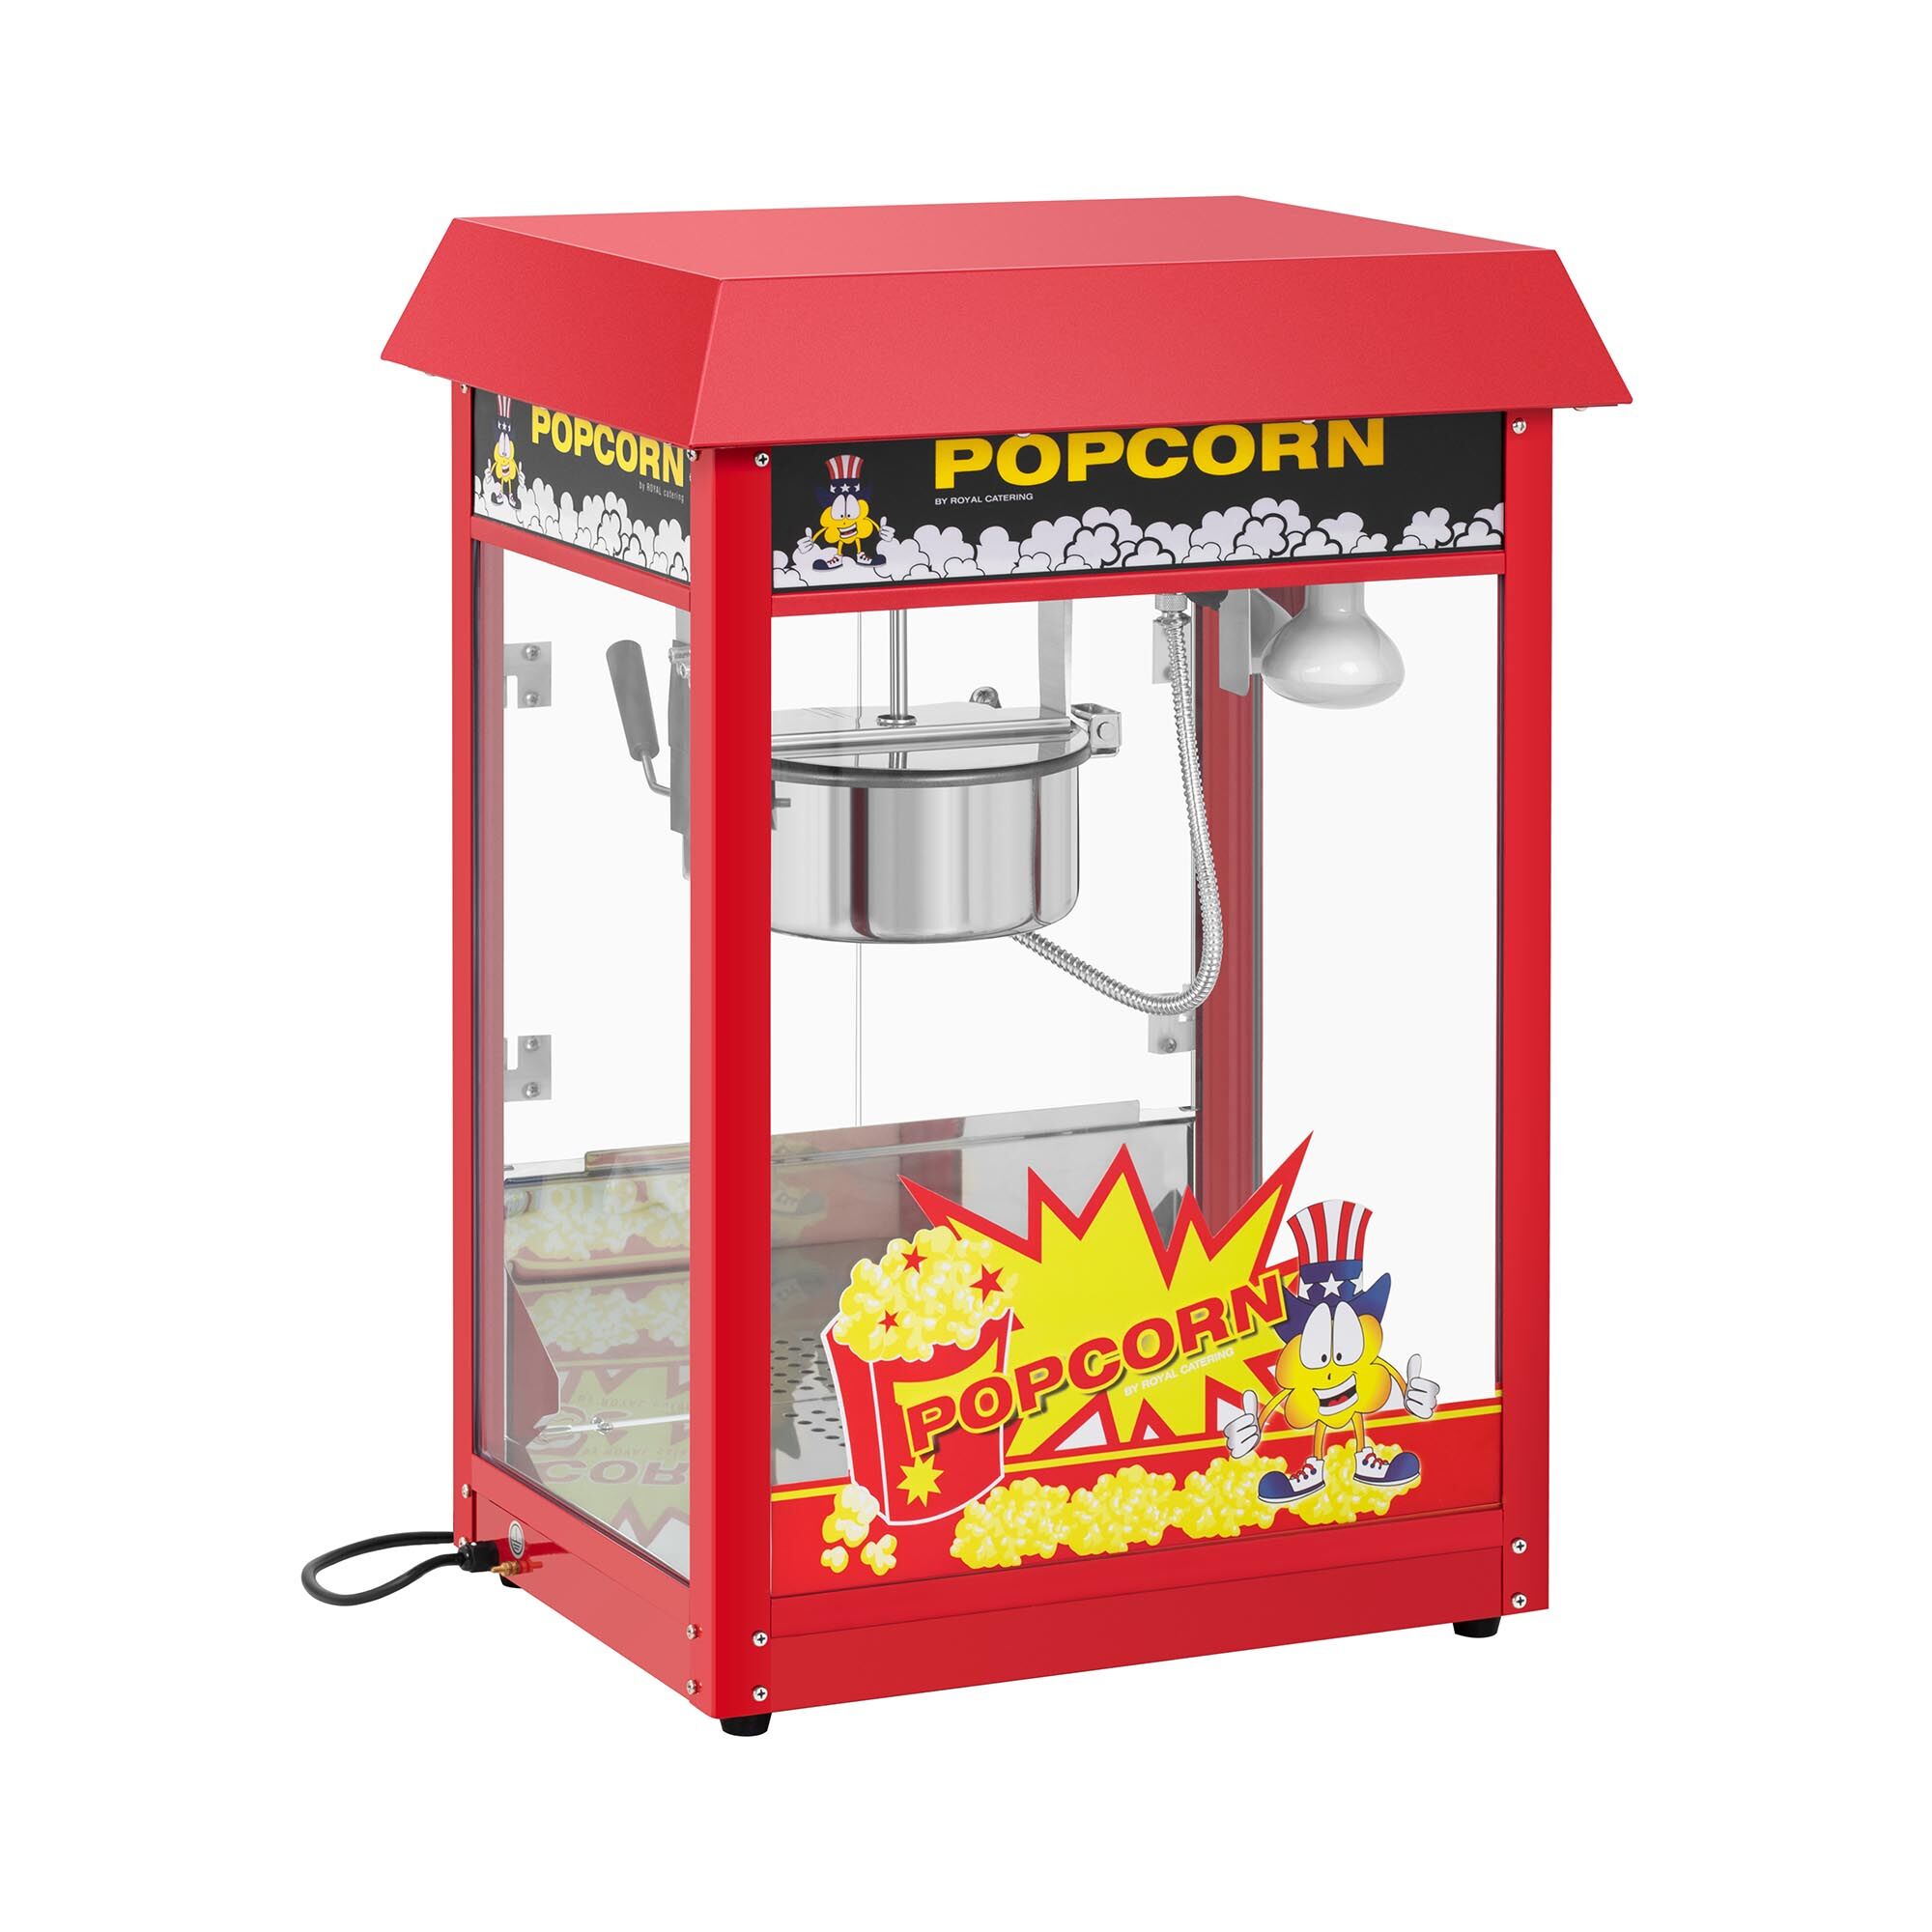 Royal Catering Popcornmaschine - 120 s Arbeitszyklus - rotes Dach 10011137